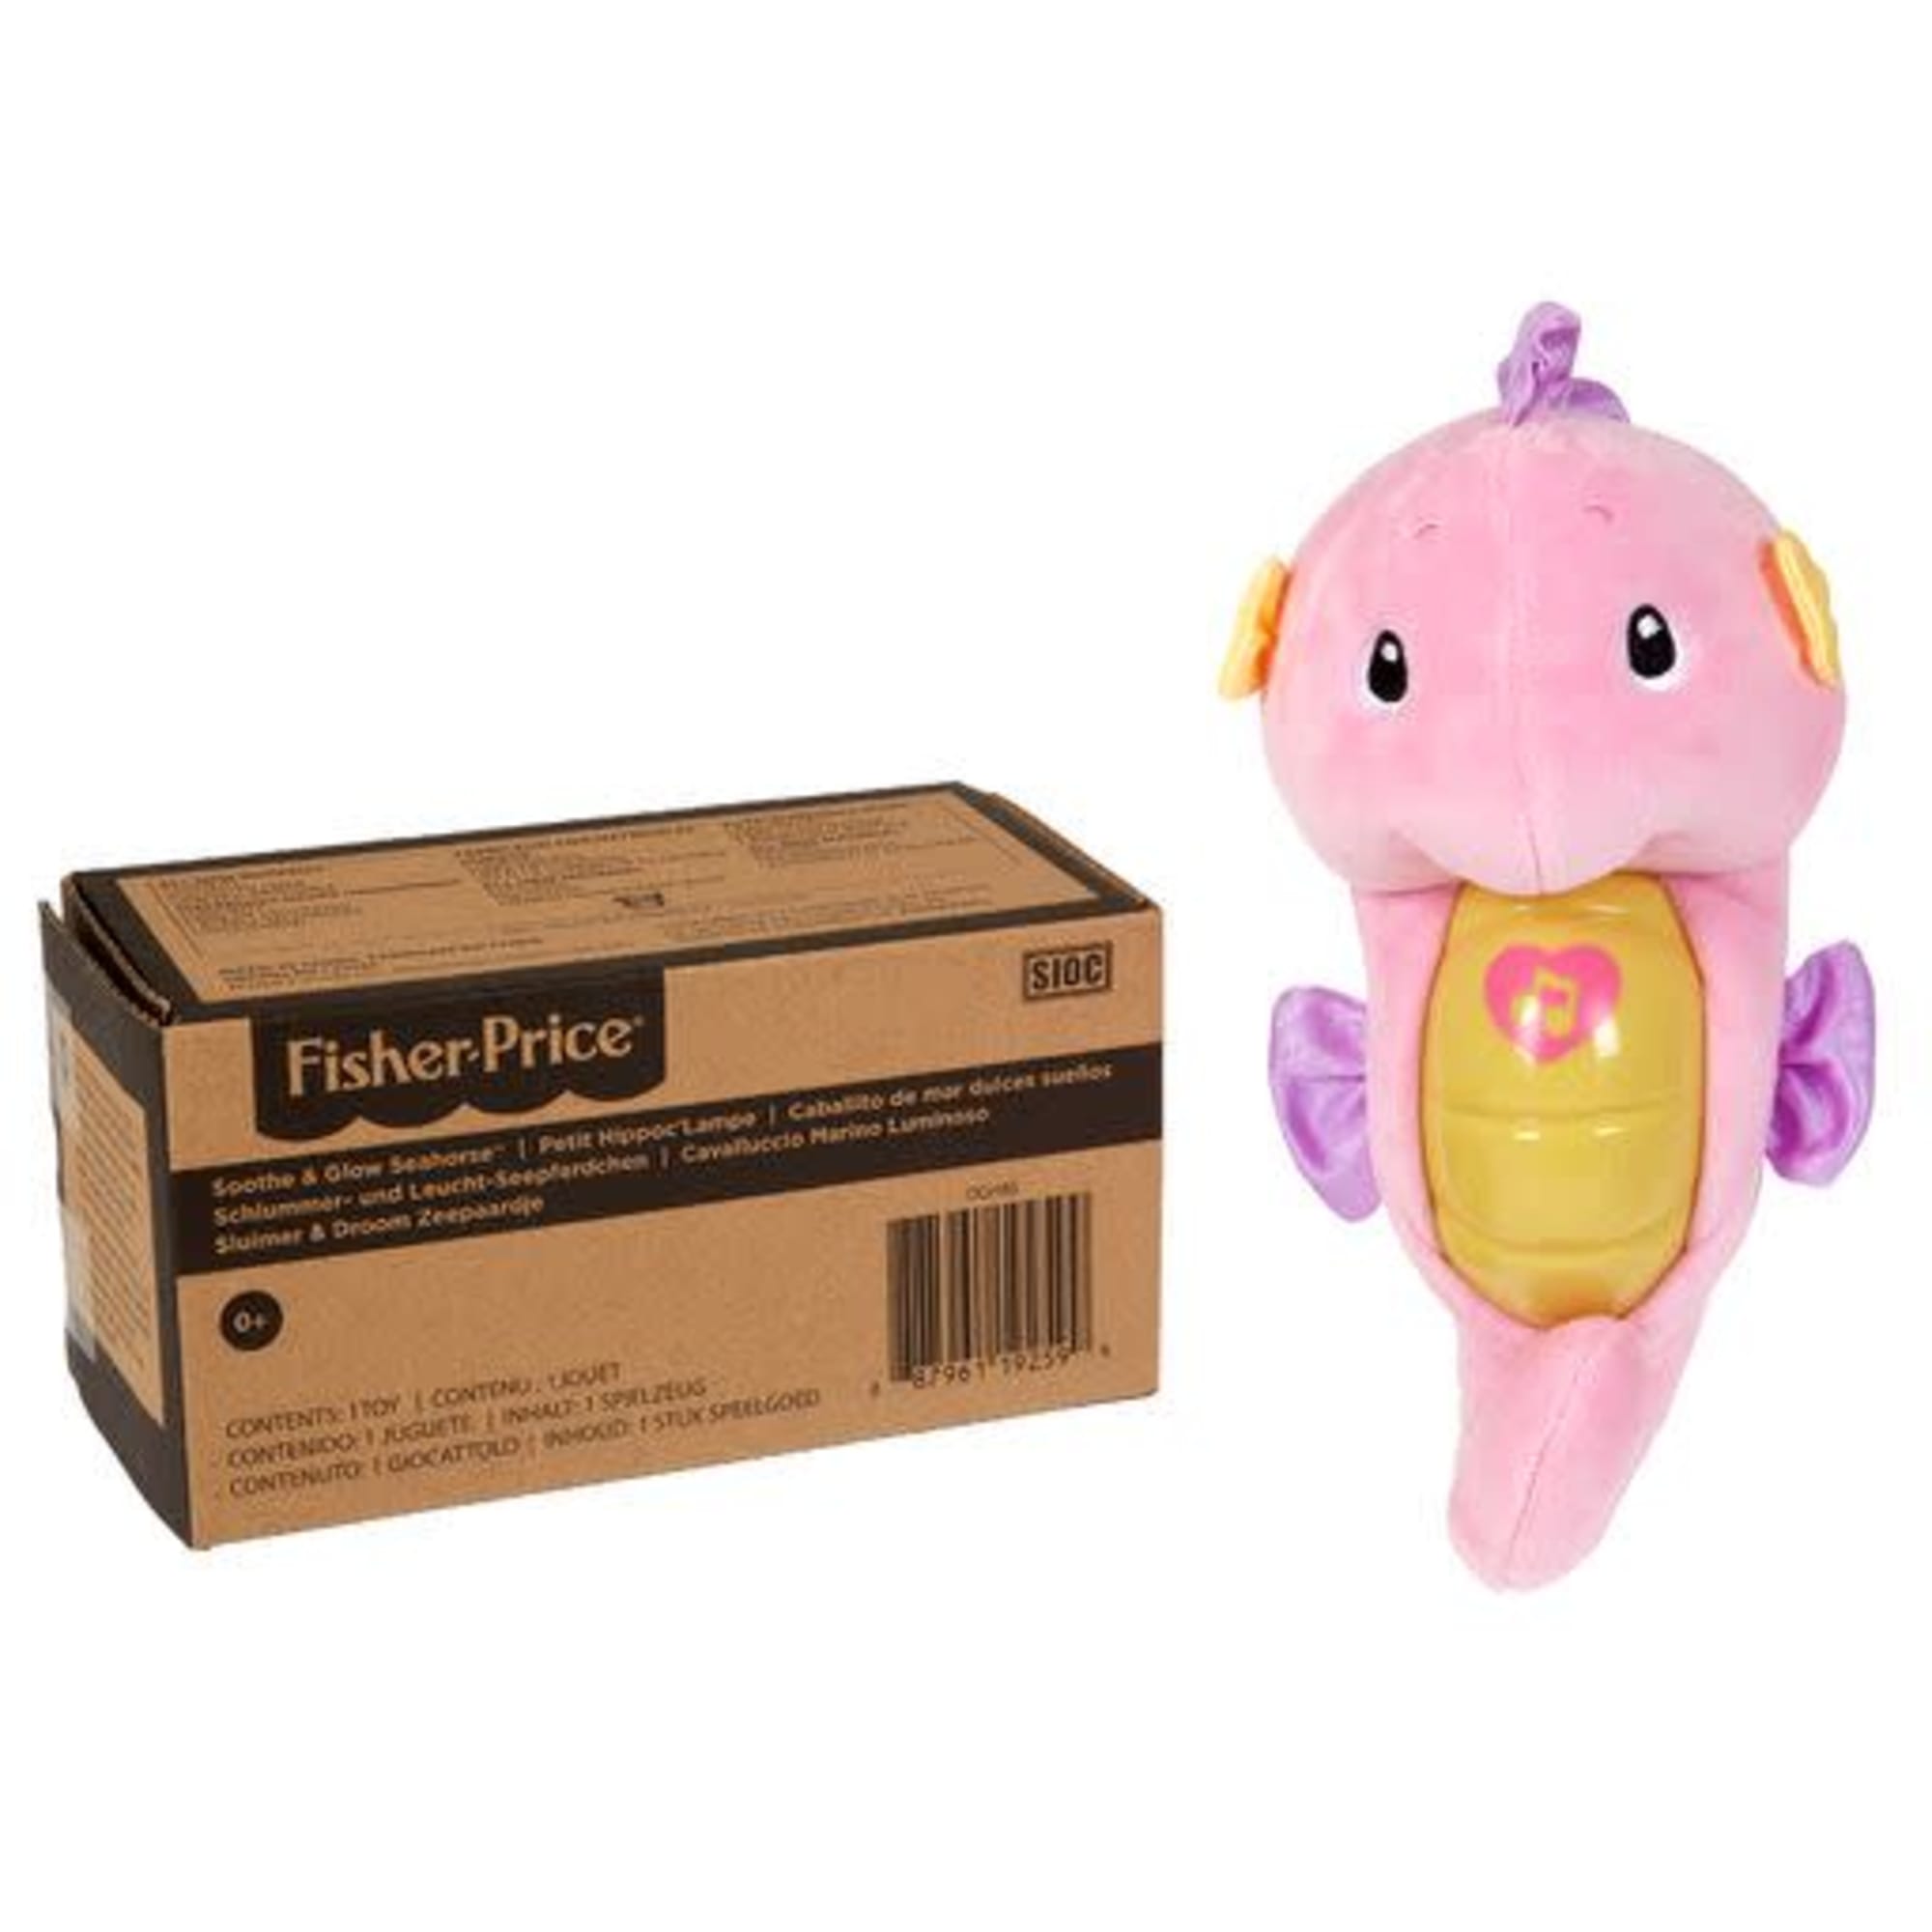 Soothe & Glow Seahorse | Pink | Fisher Price